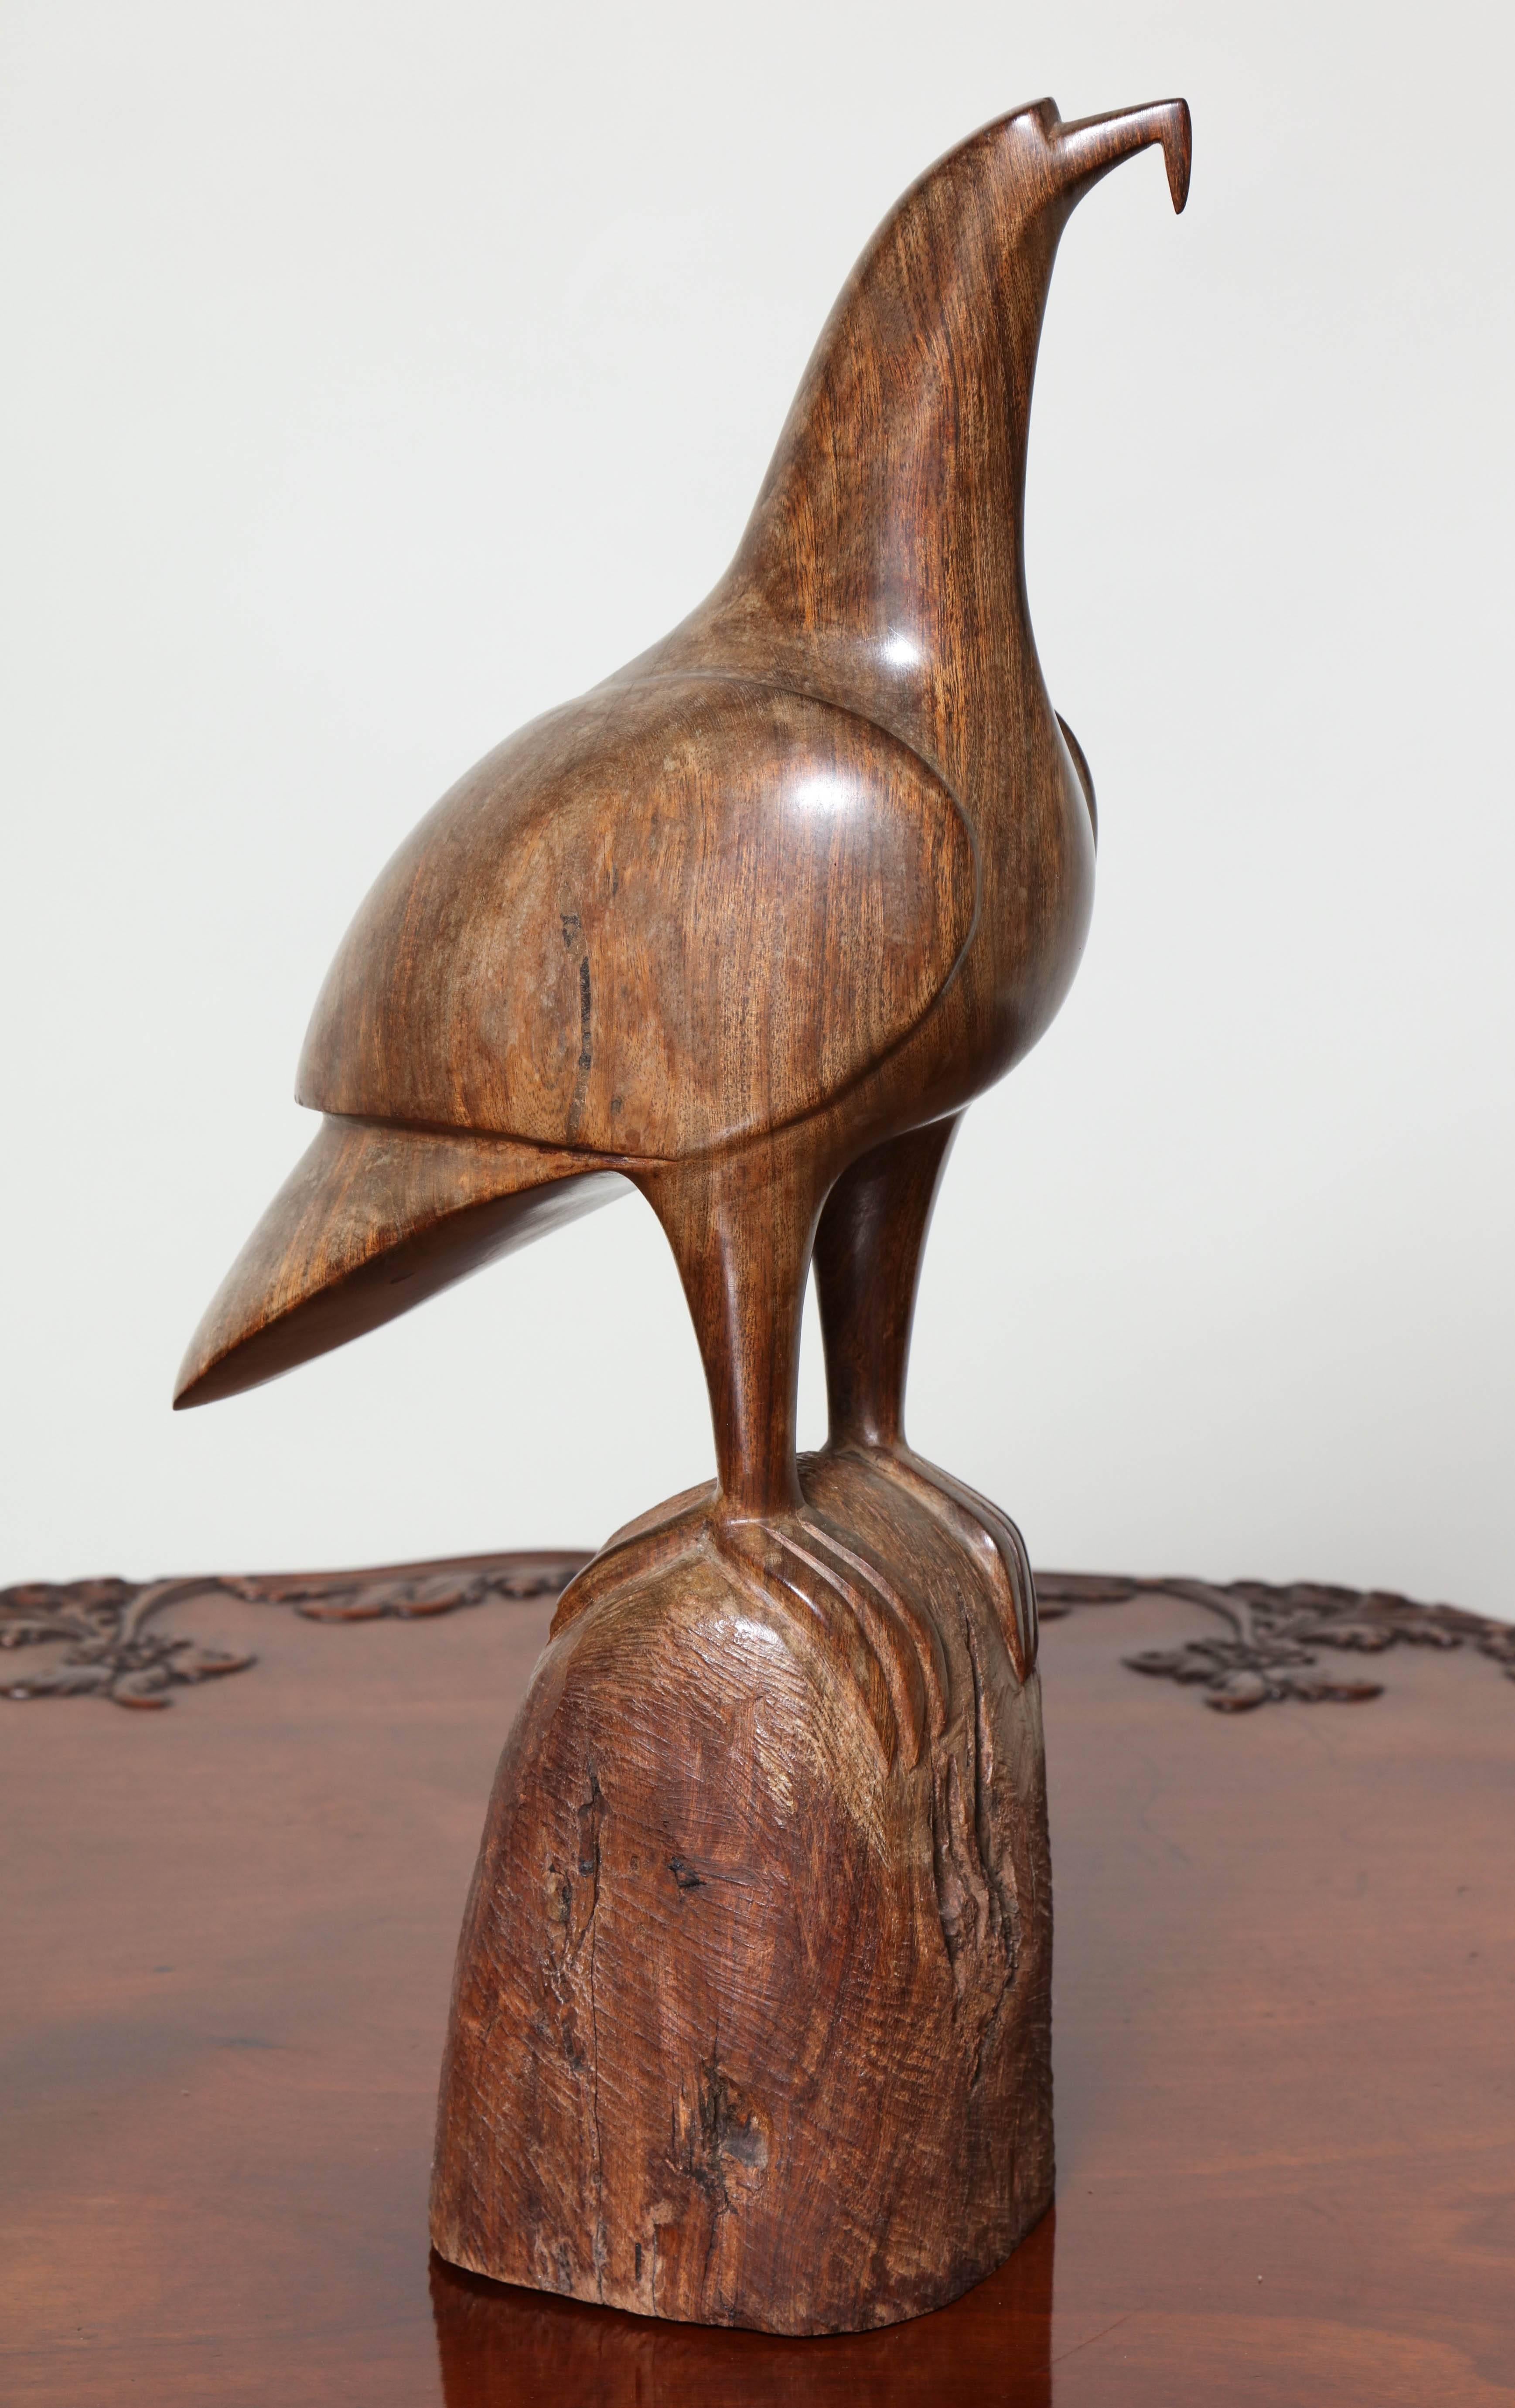 Finely carved Koa wood seabird, probably a frigate bird or shearwater, crafted from vividly grained and dense timber, the highly burnished surface of the bird standing out in contrast from the roughhewn and rasped stump on which it stands.
Both